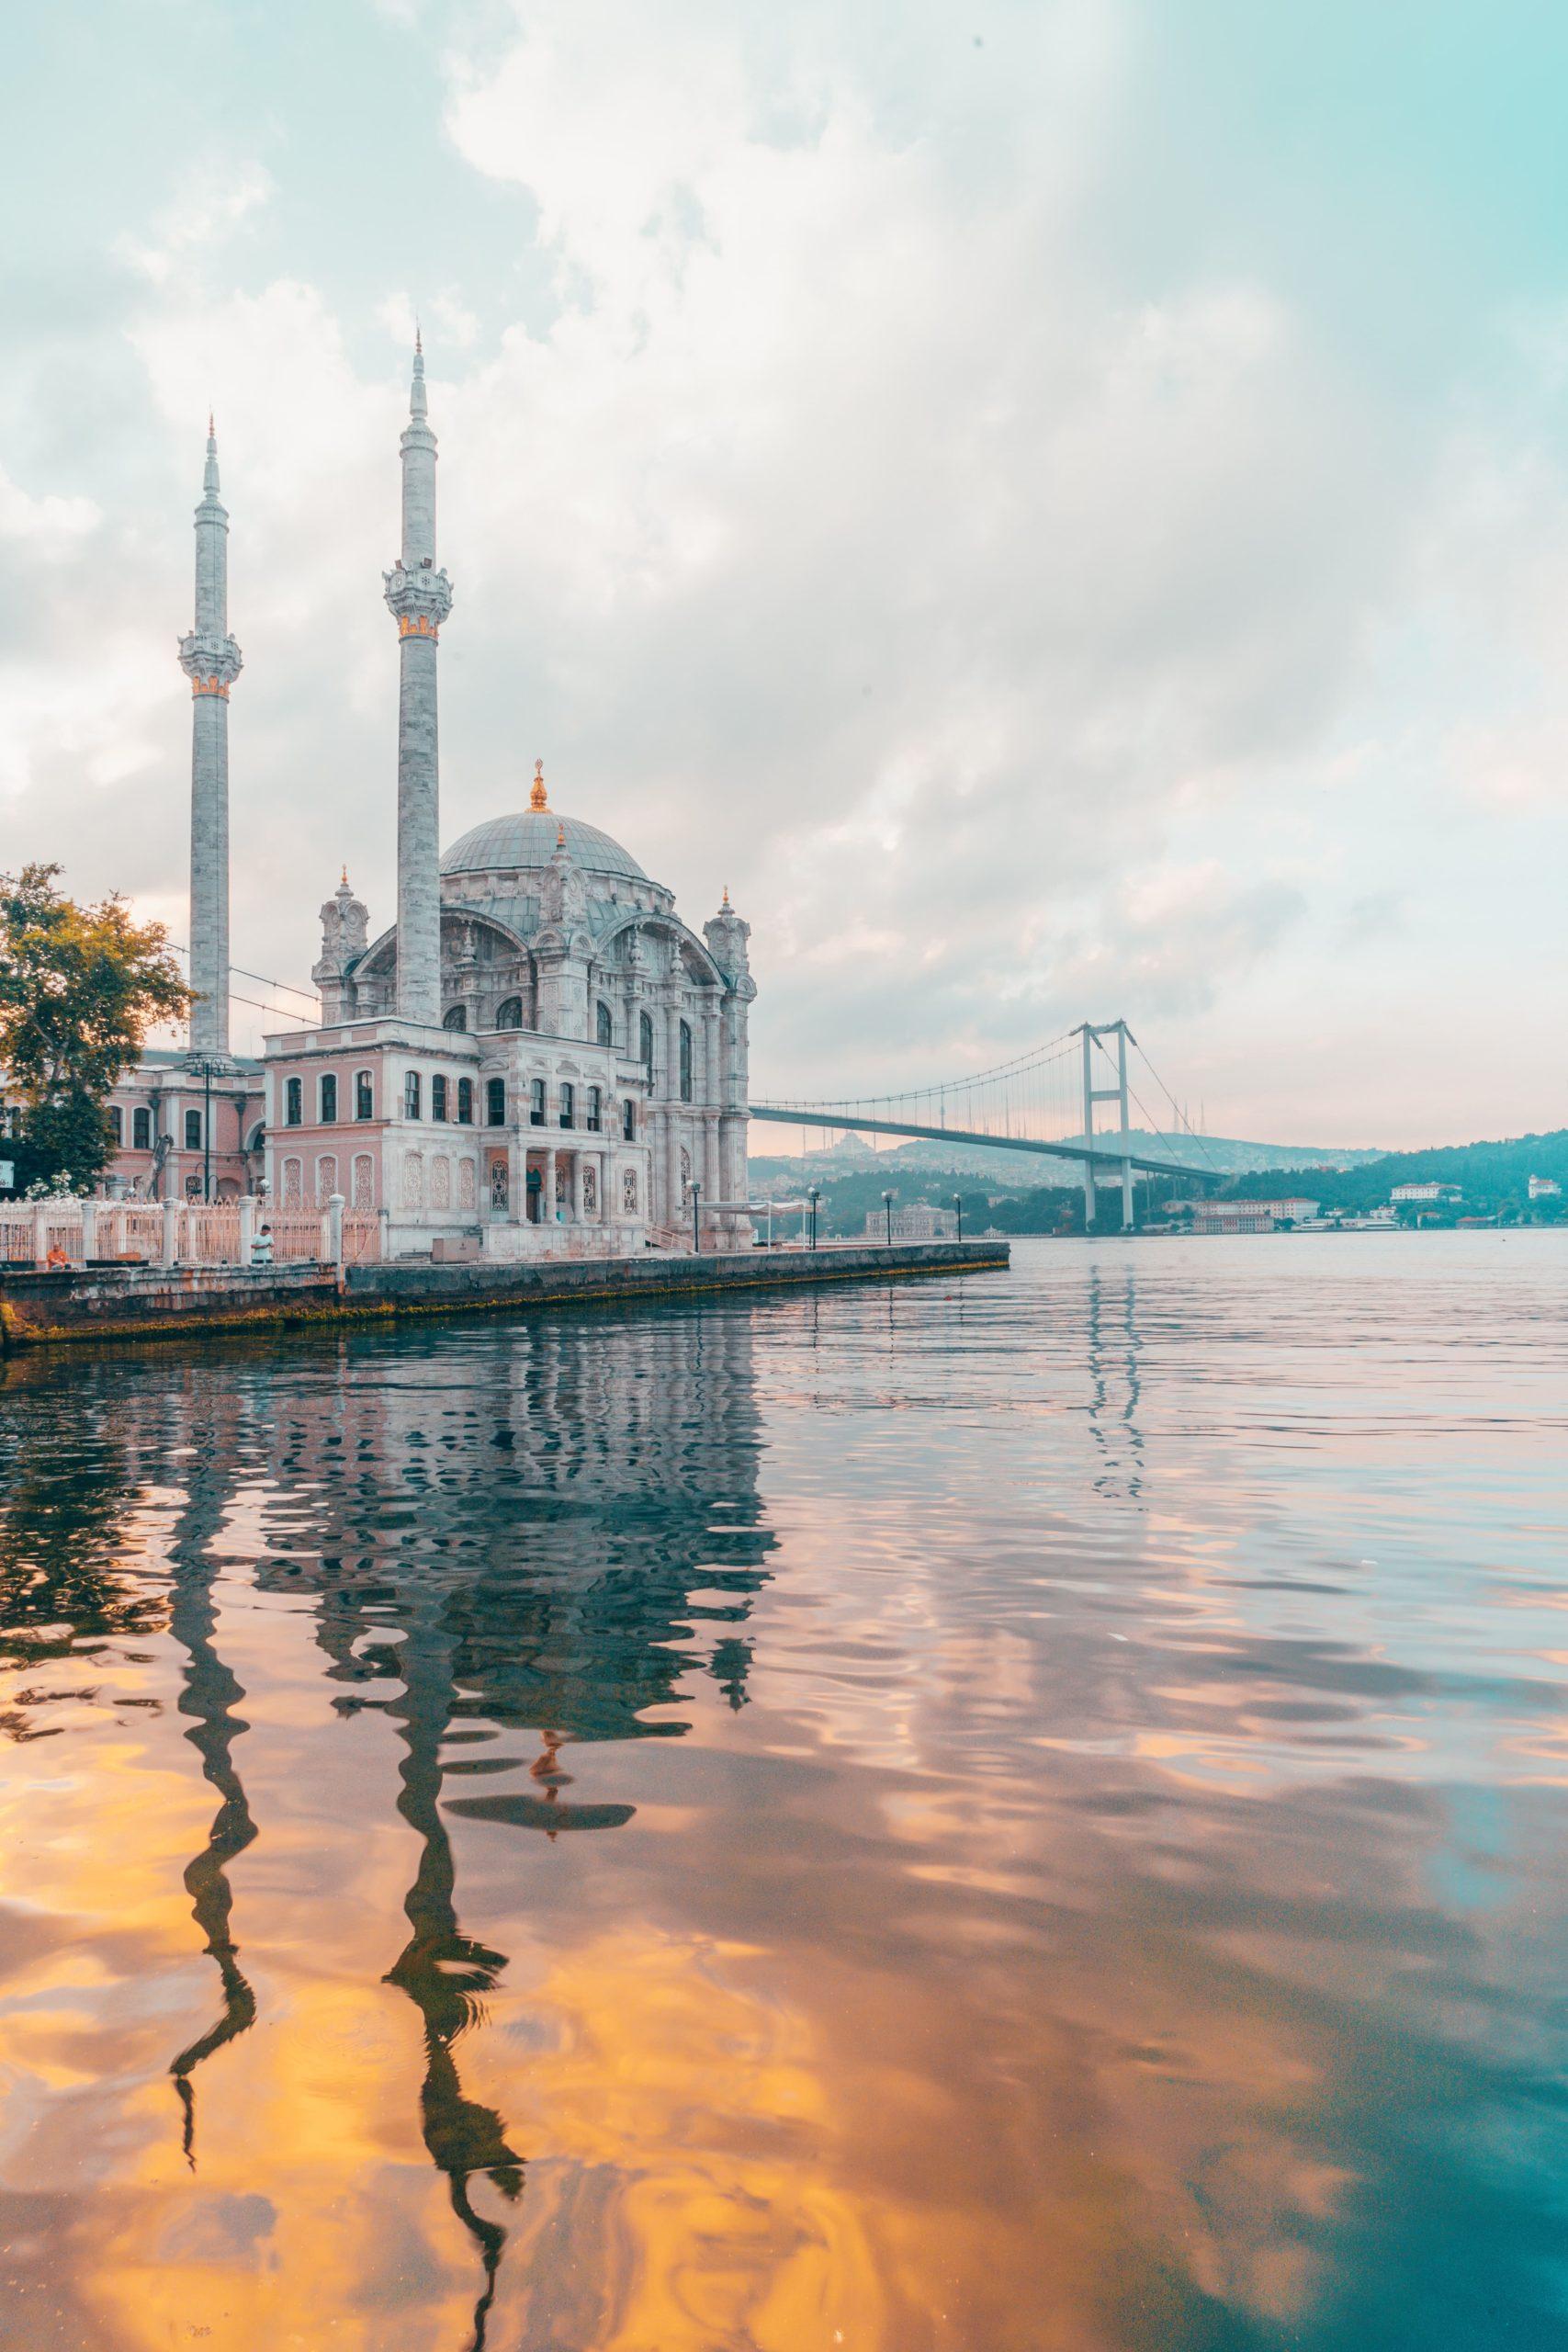 A view of a stunning mosque in Istanbul from the water